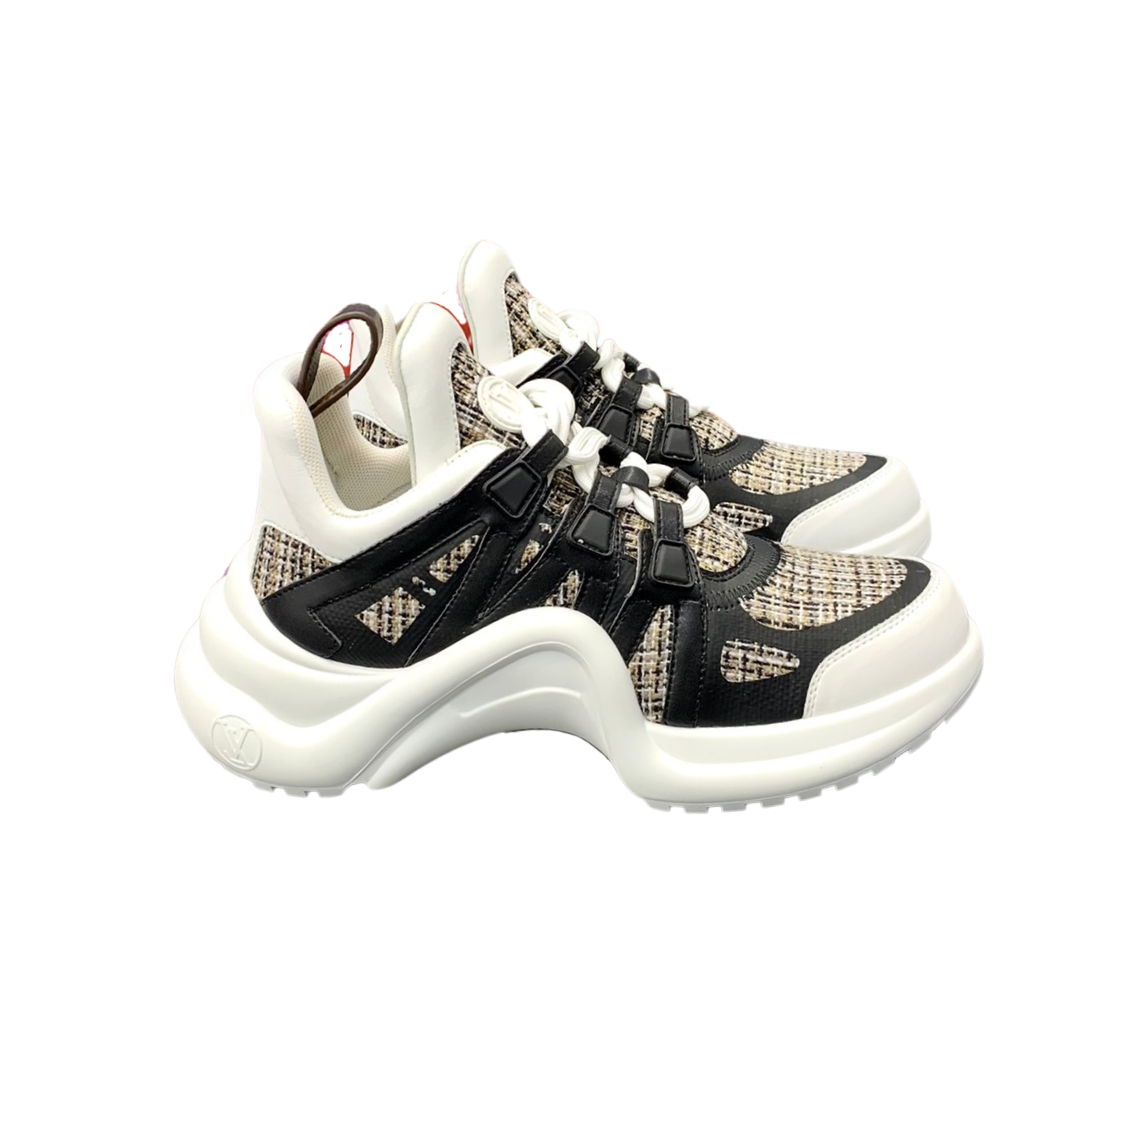 Luxurious Women's Sneakers - Stylish & High Quality